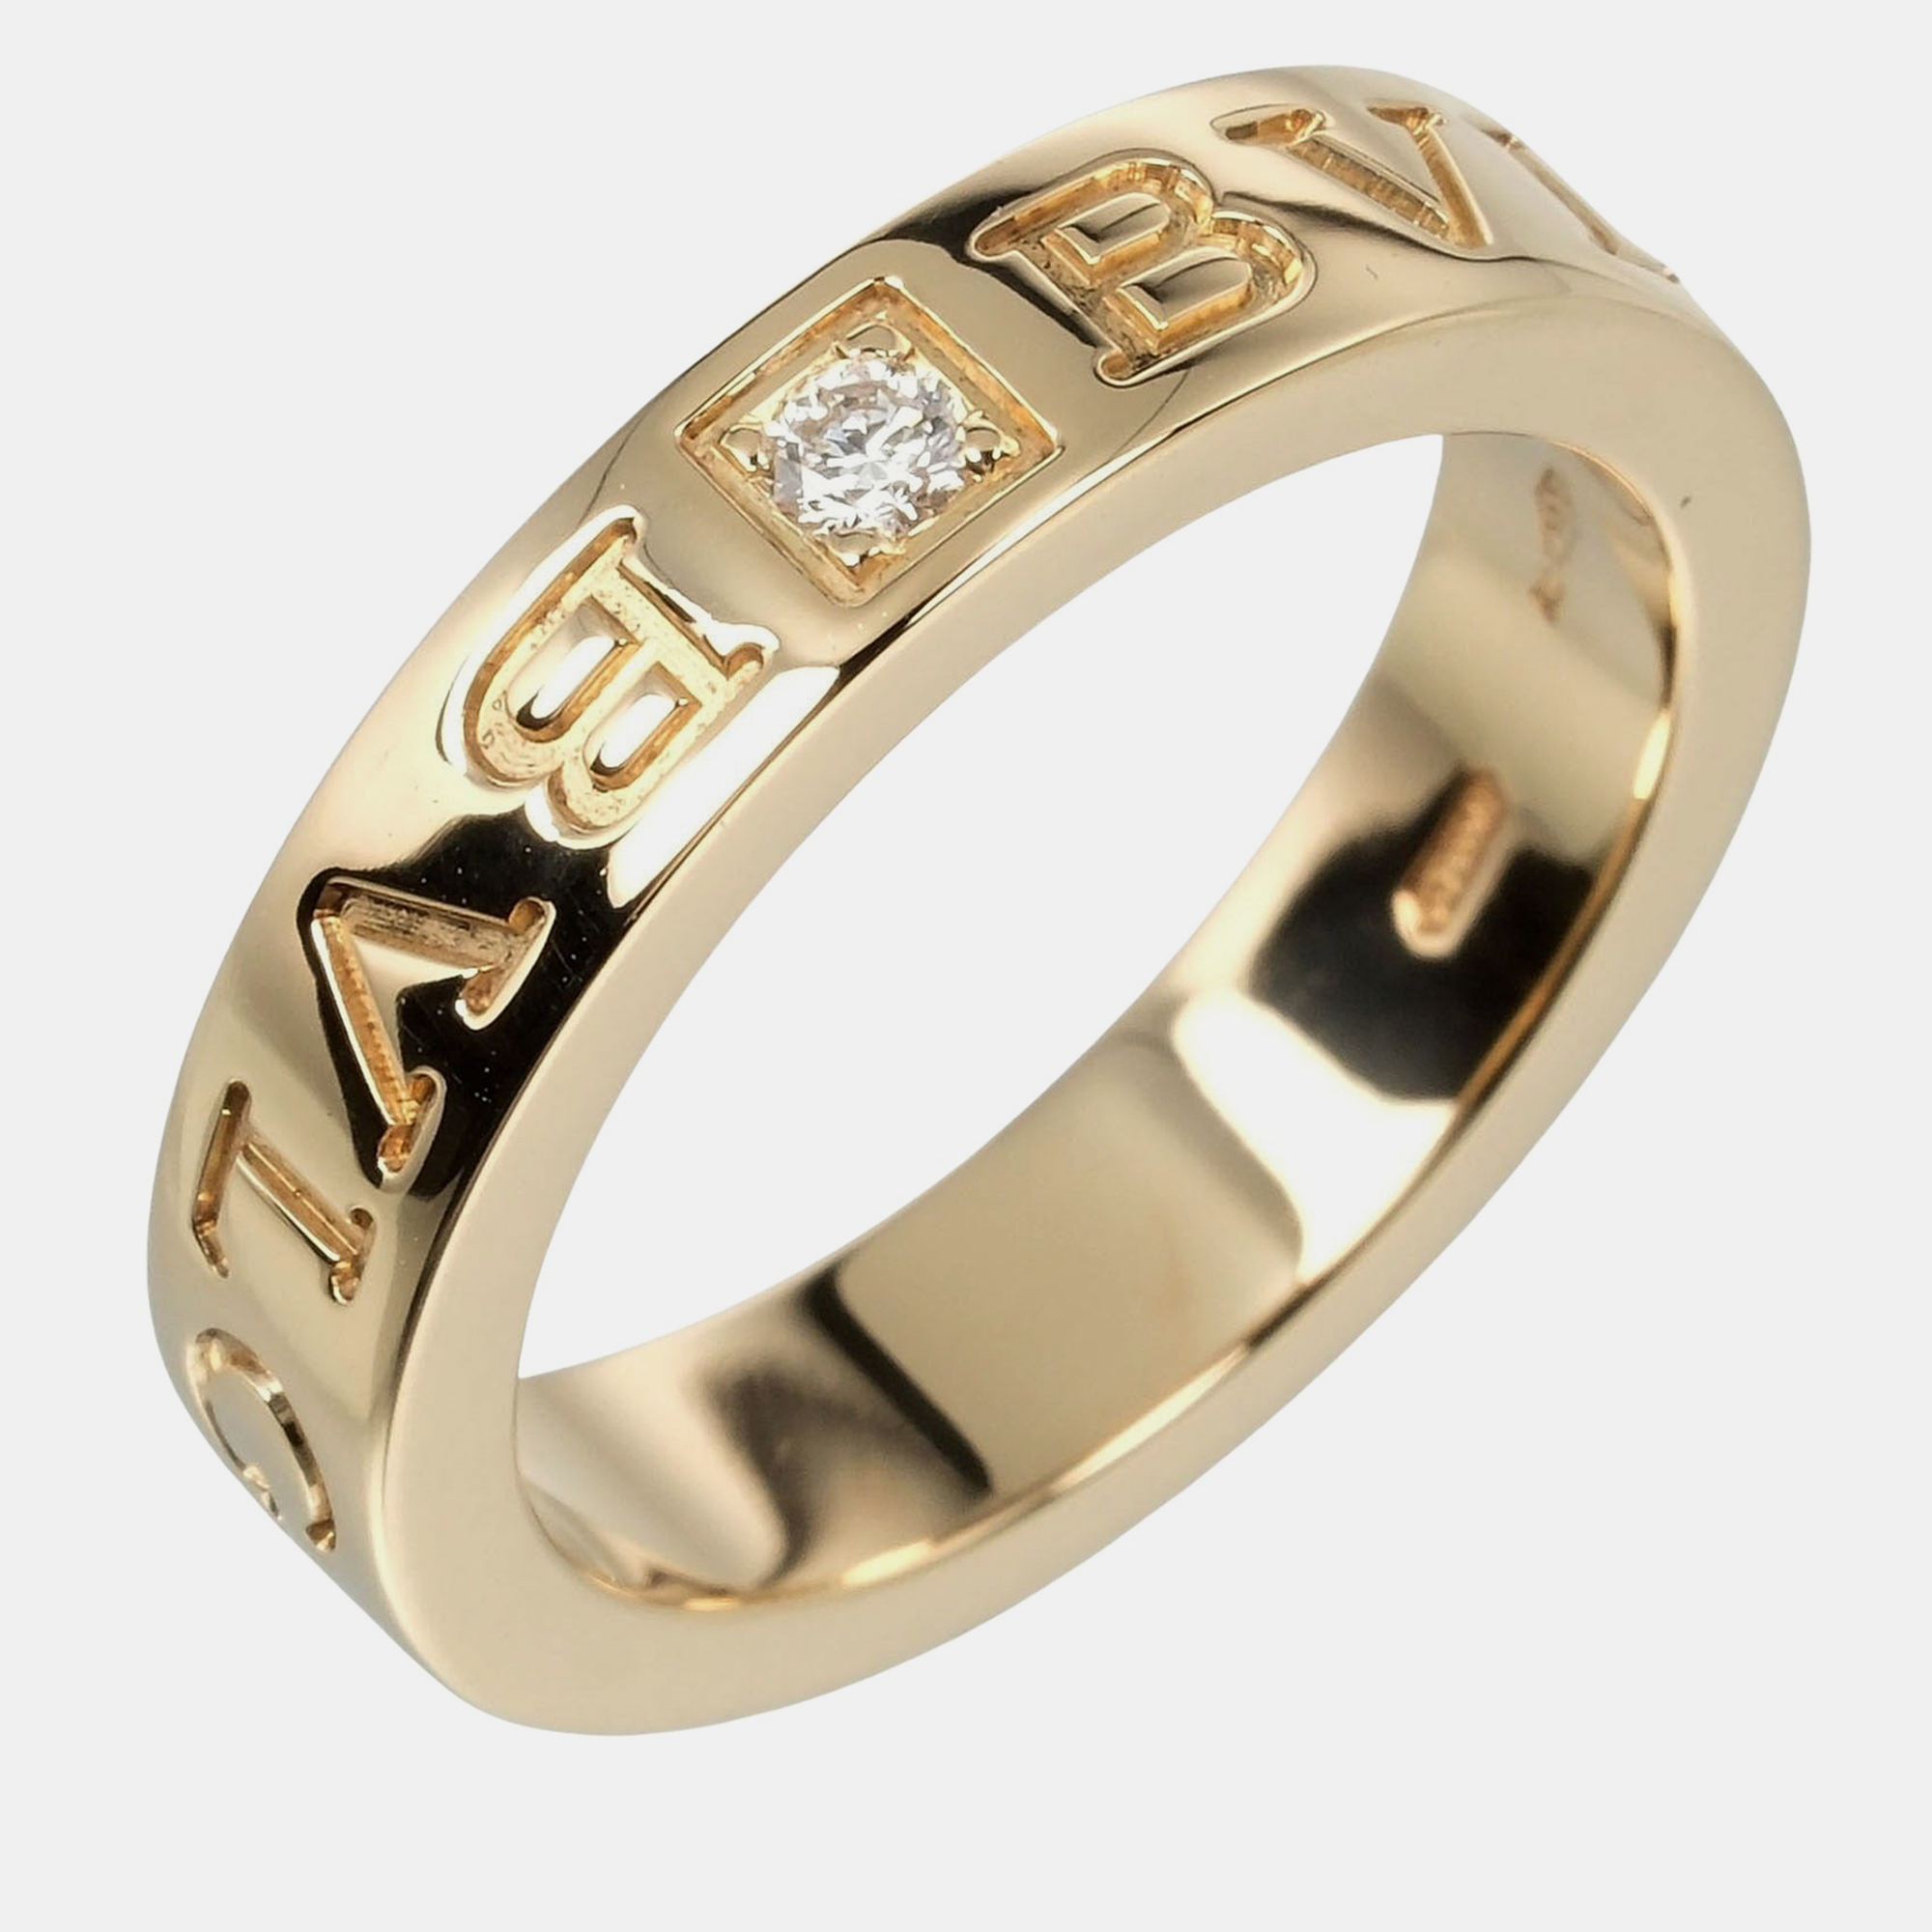 A symbol of artisanal mastery this Bvlgari ring seamlessly integrates into your everyday and special occasions enhancing any outfit with opulence. Crafted with precision and passion it guarantees to remain a cherished heirloom.